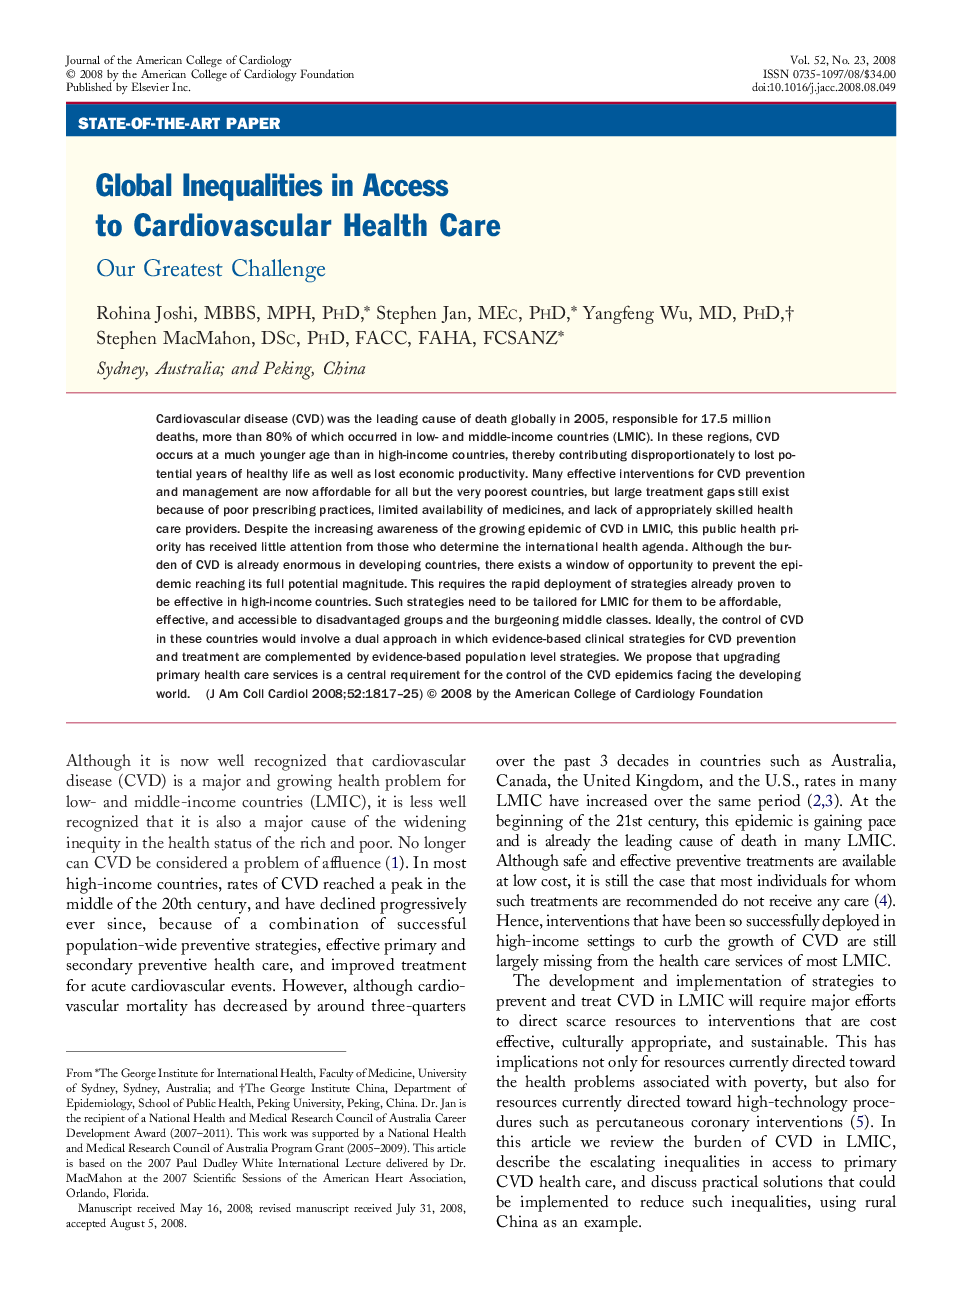 Global Inequalities in Access to Cardiovascular Health Care : Our Greatest Challenge